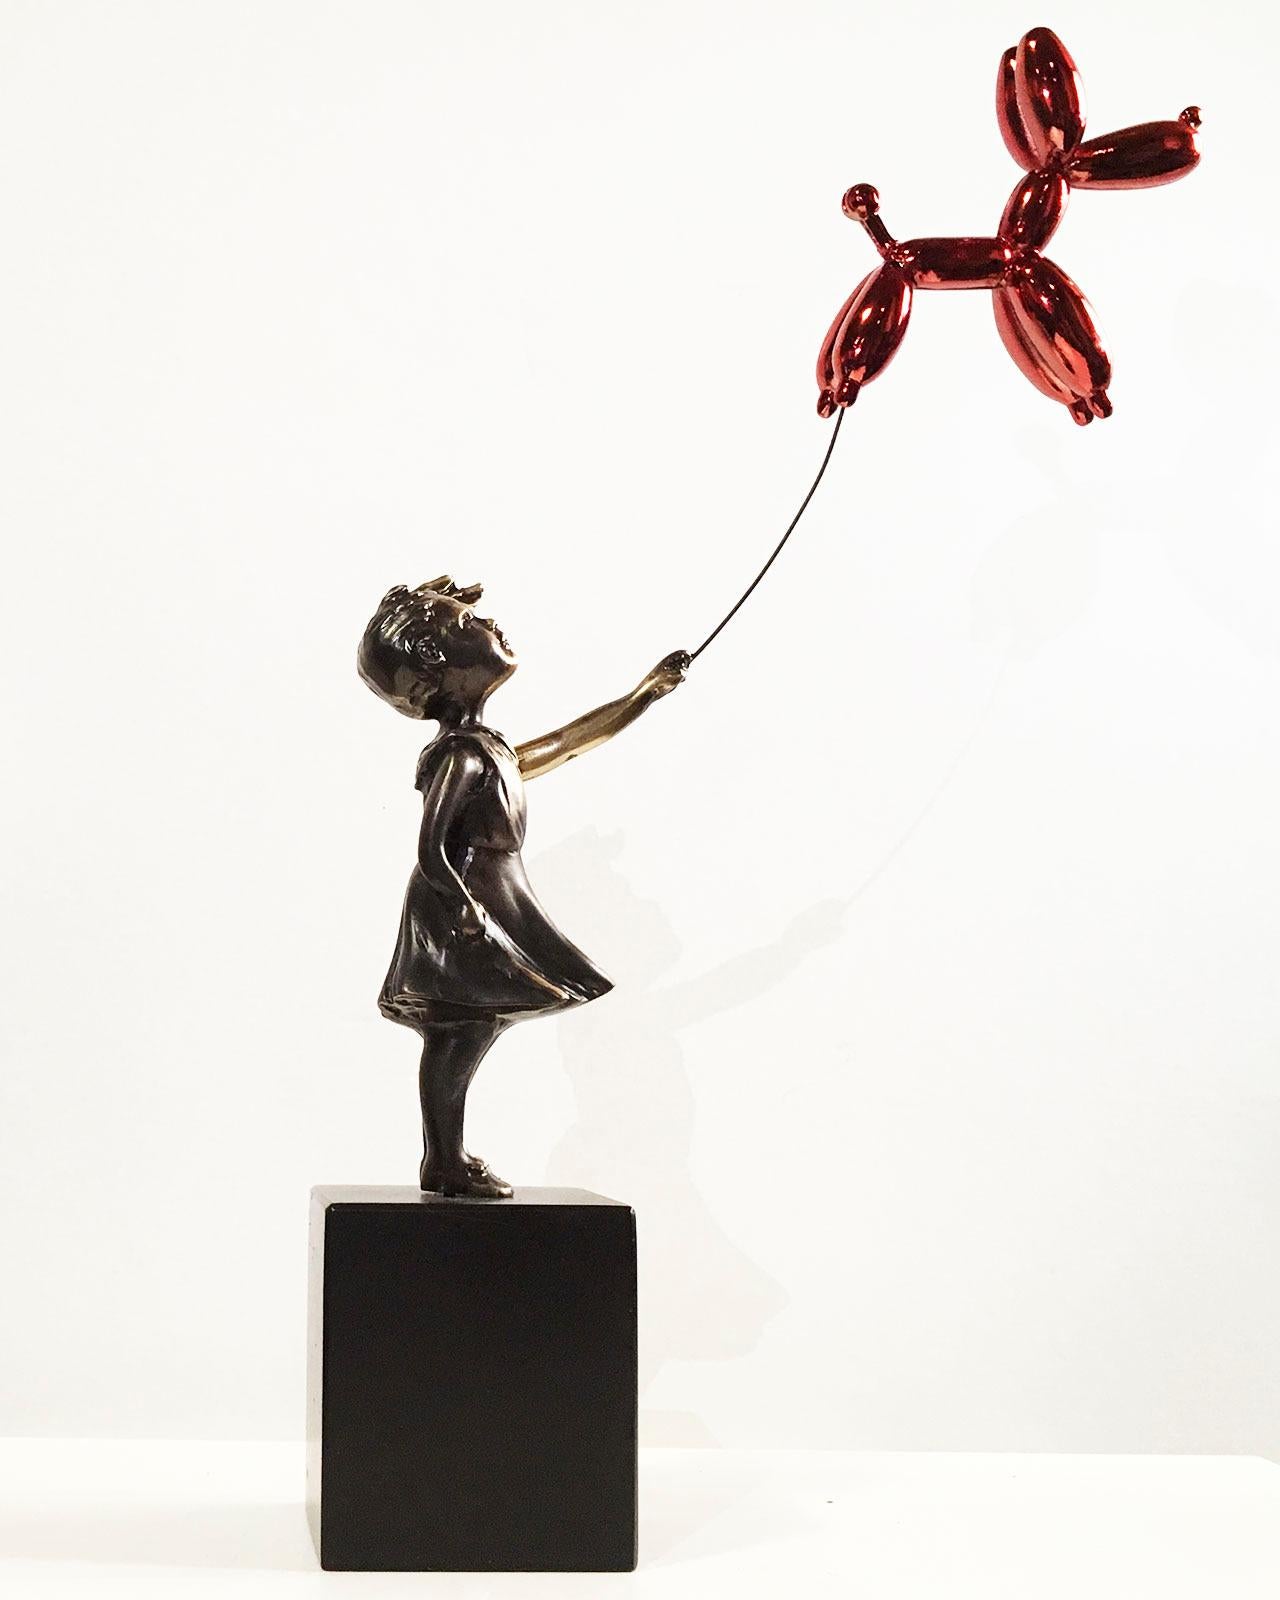 Street Art Sculpture "Girl with balloon dog Big" by Miguel Guía.
This sculpture is made by lost wax bronze casting.
Limited edition of 199 works.
Although the required time to deliver a shipment is usually between 3 and 10 days please do not